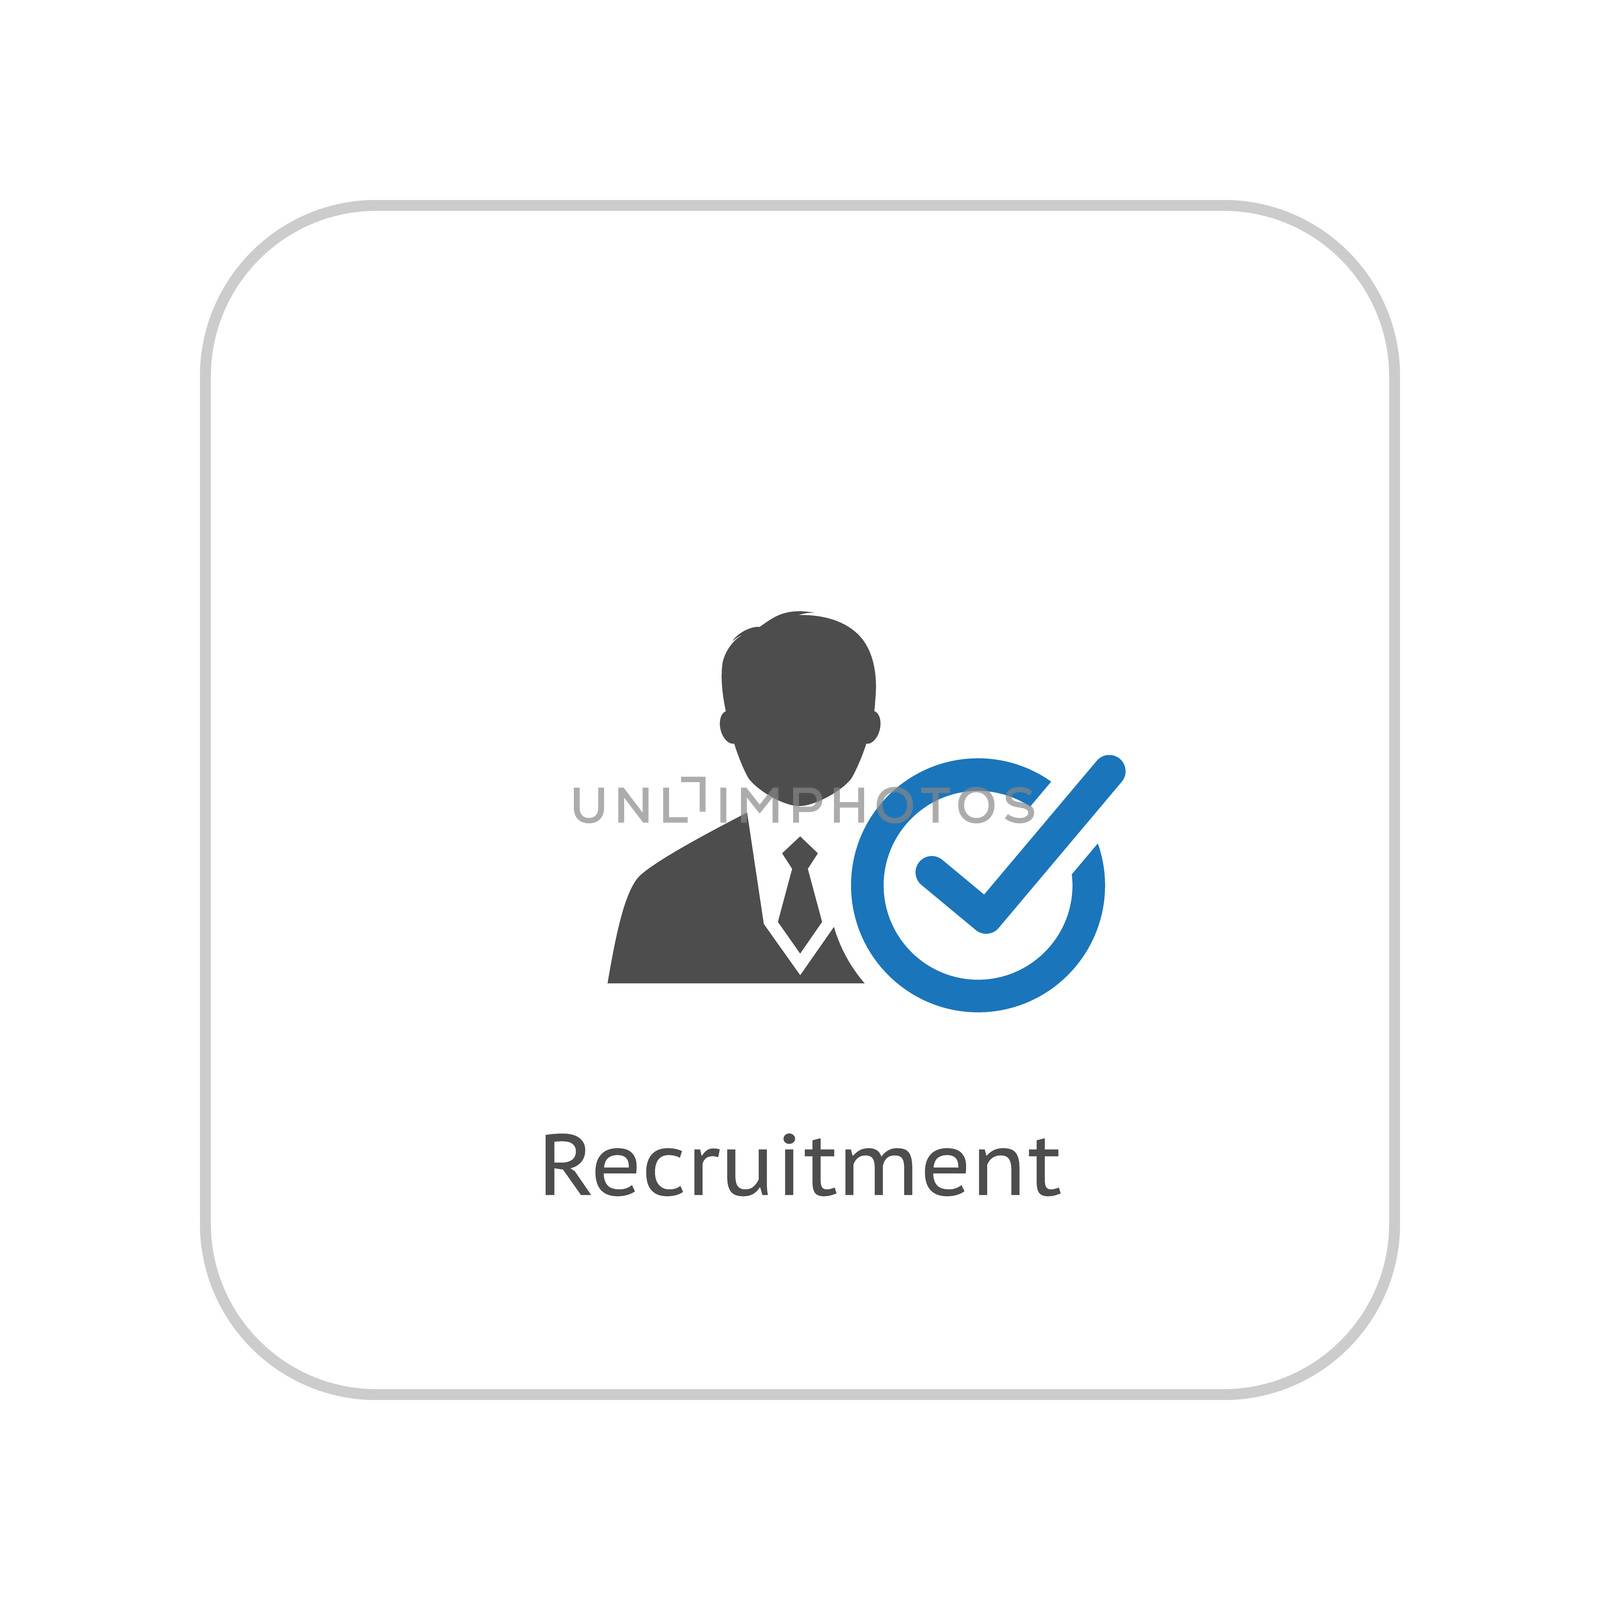 Recruitment Icon. Business Concept. Flat Design. Isolated Illustration.